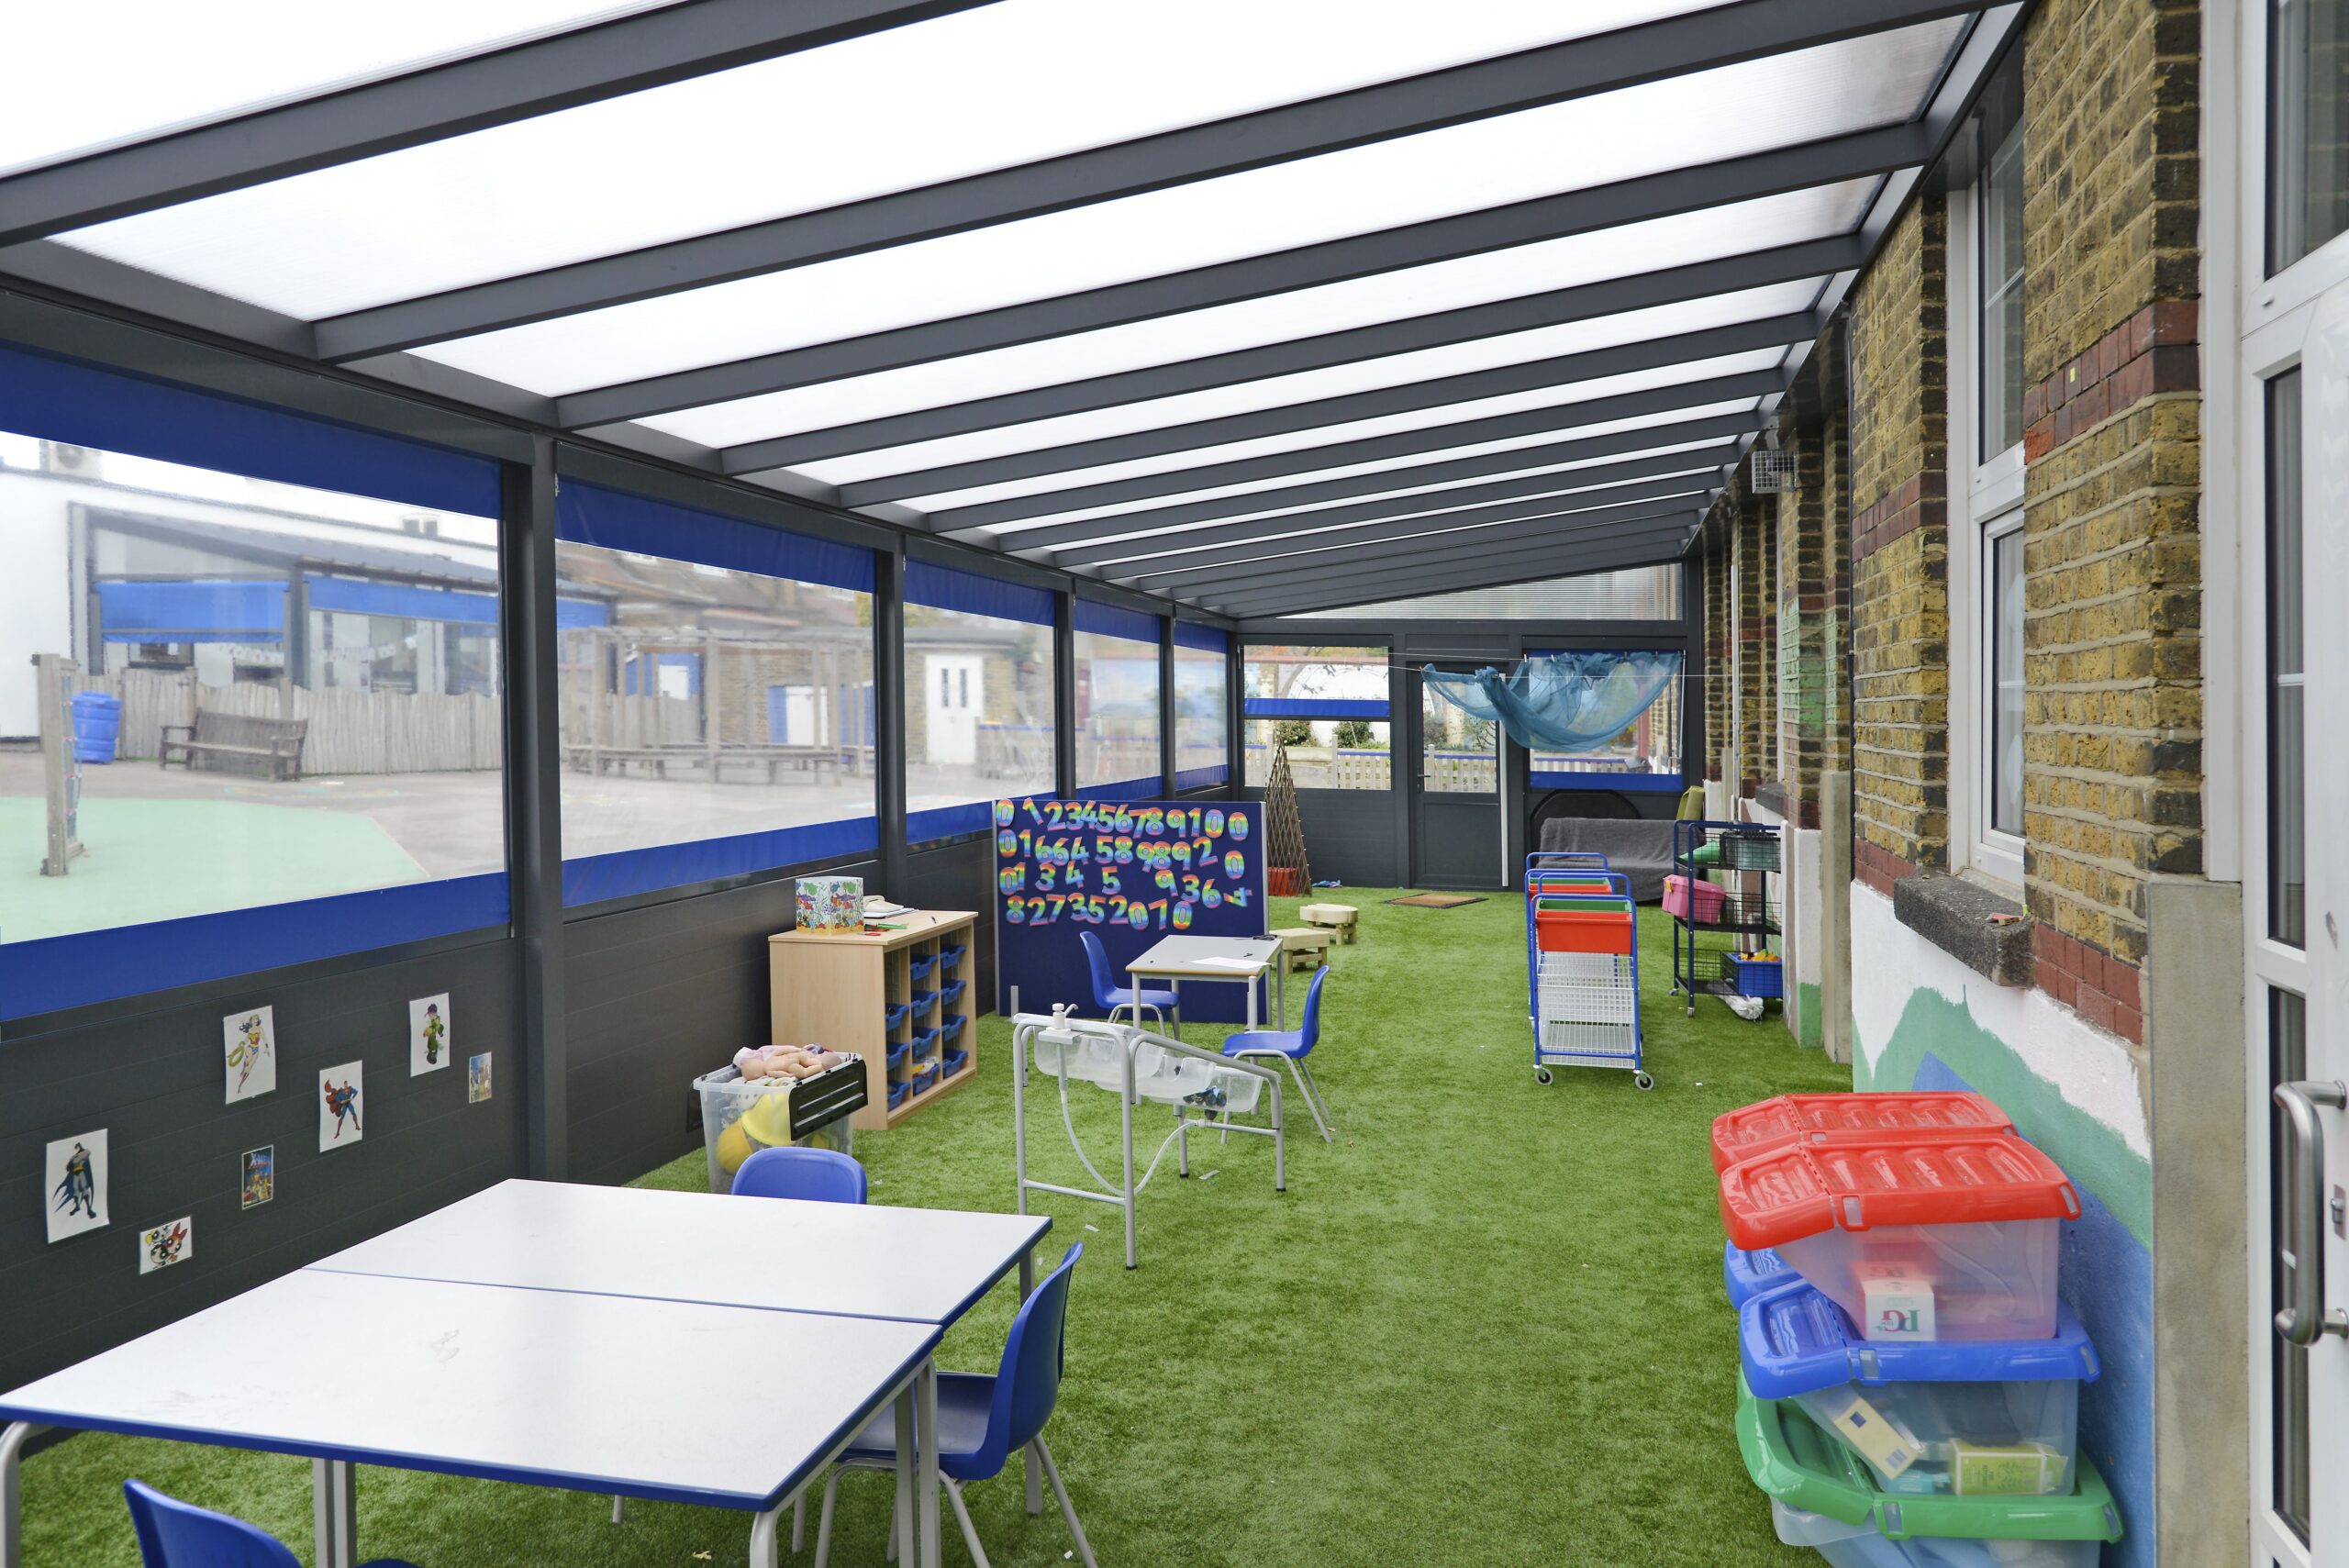 A view from inside the lean-to canopy at Childs Hill School with the canopy zip blinds down